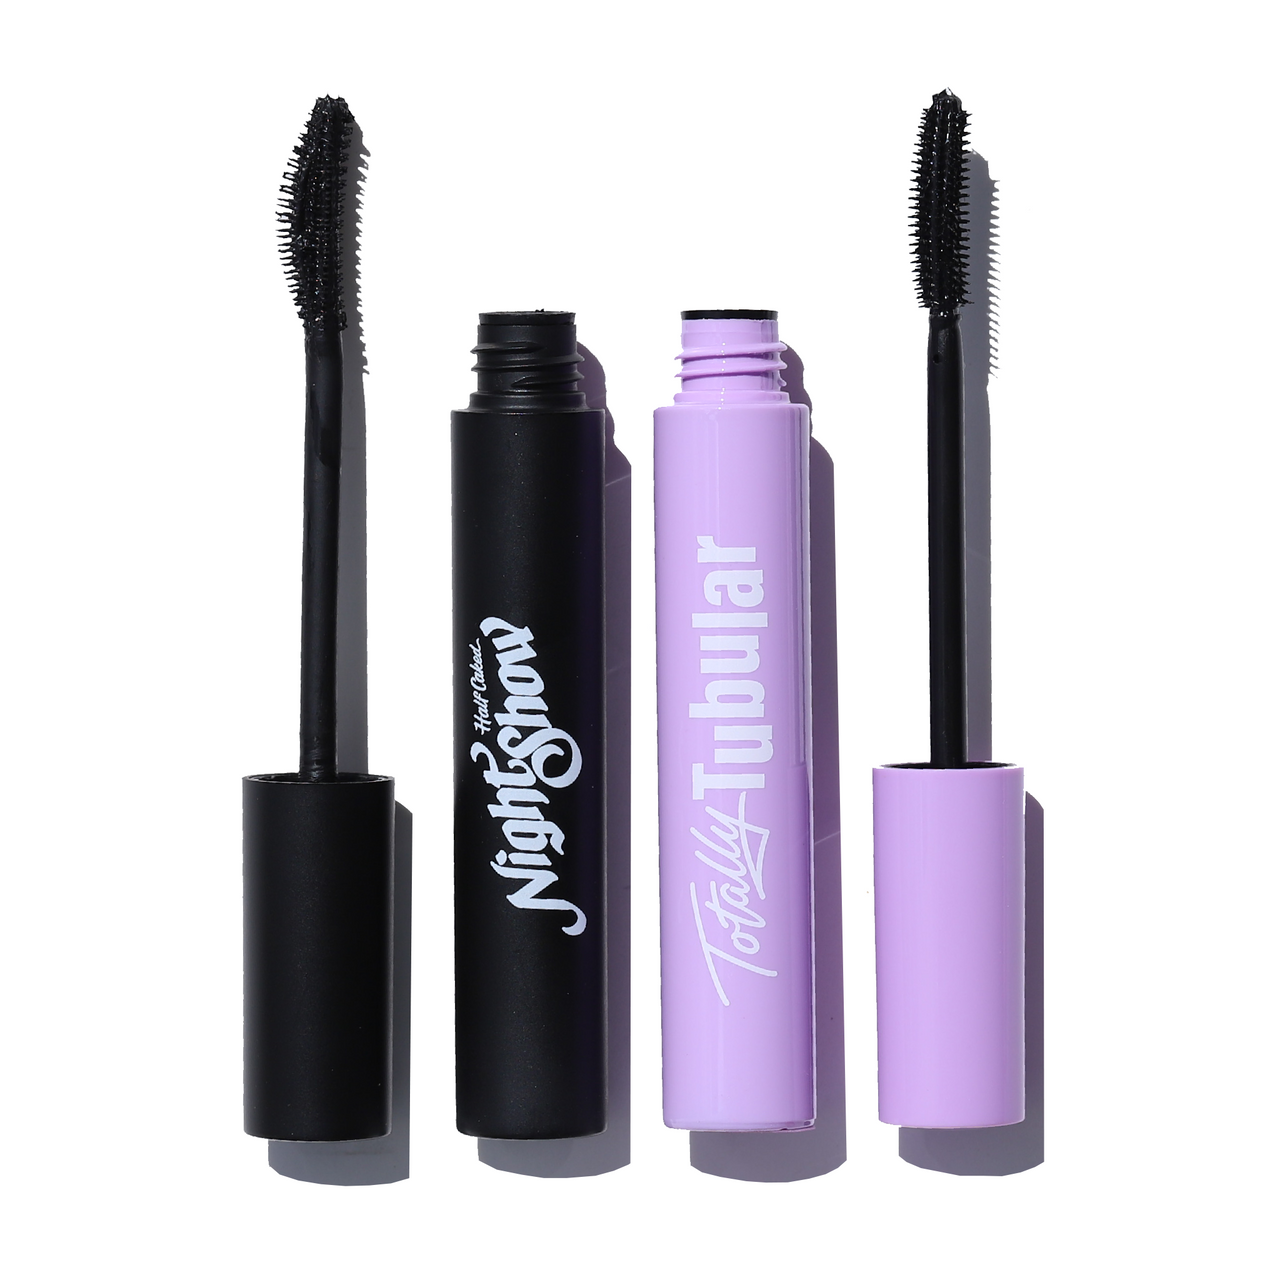 Duo Mascara Totalement Tubulaire + Night Show